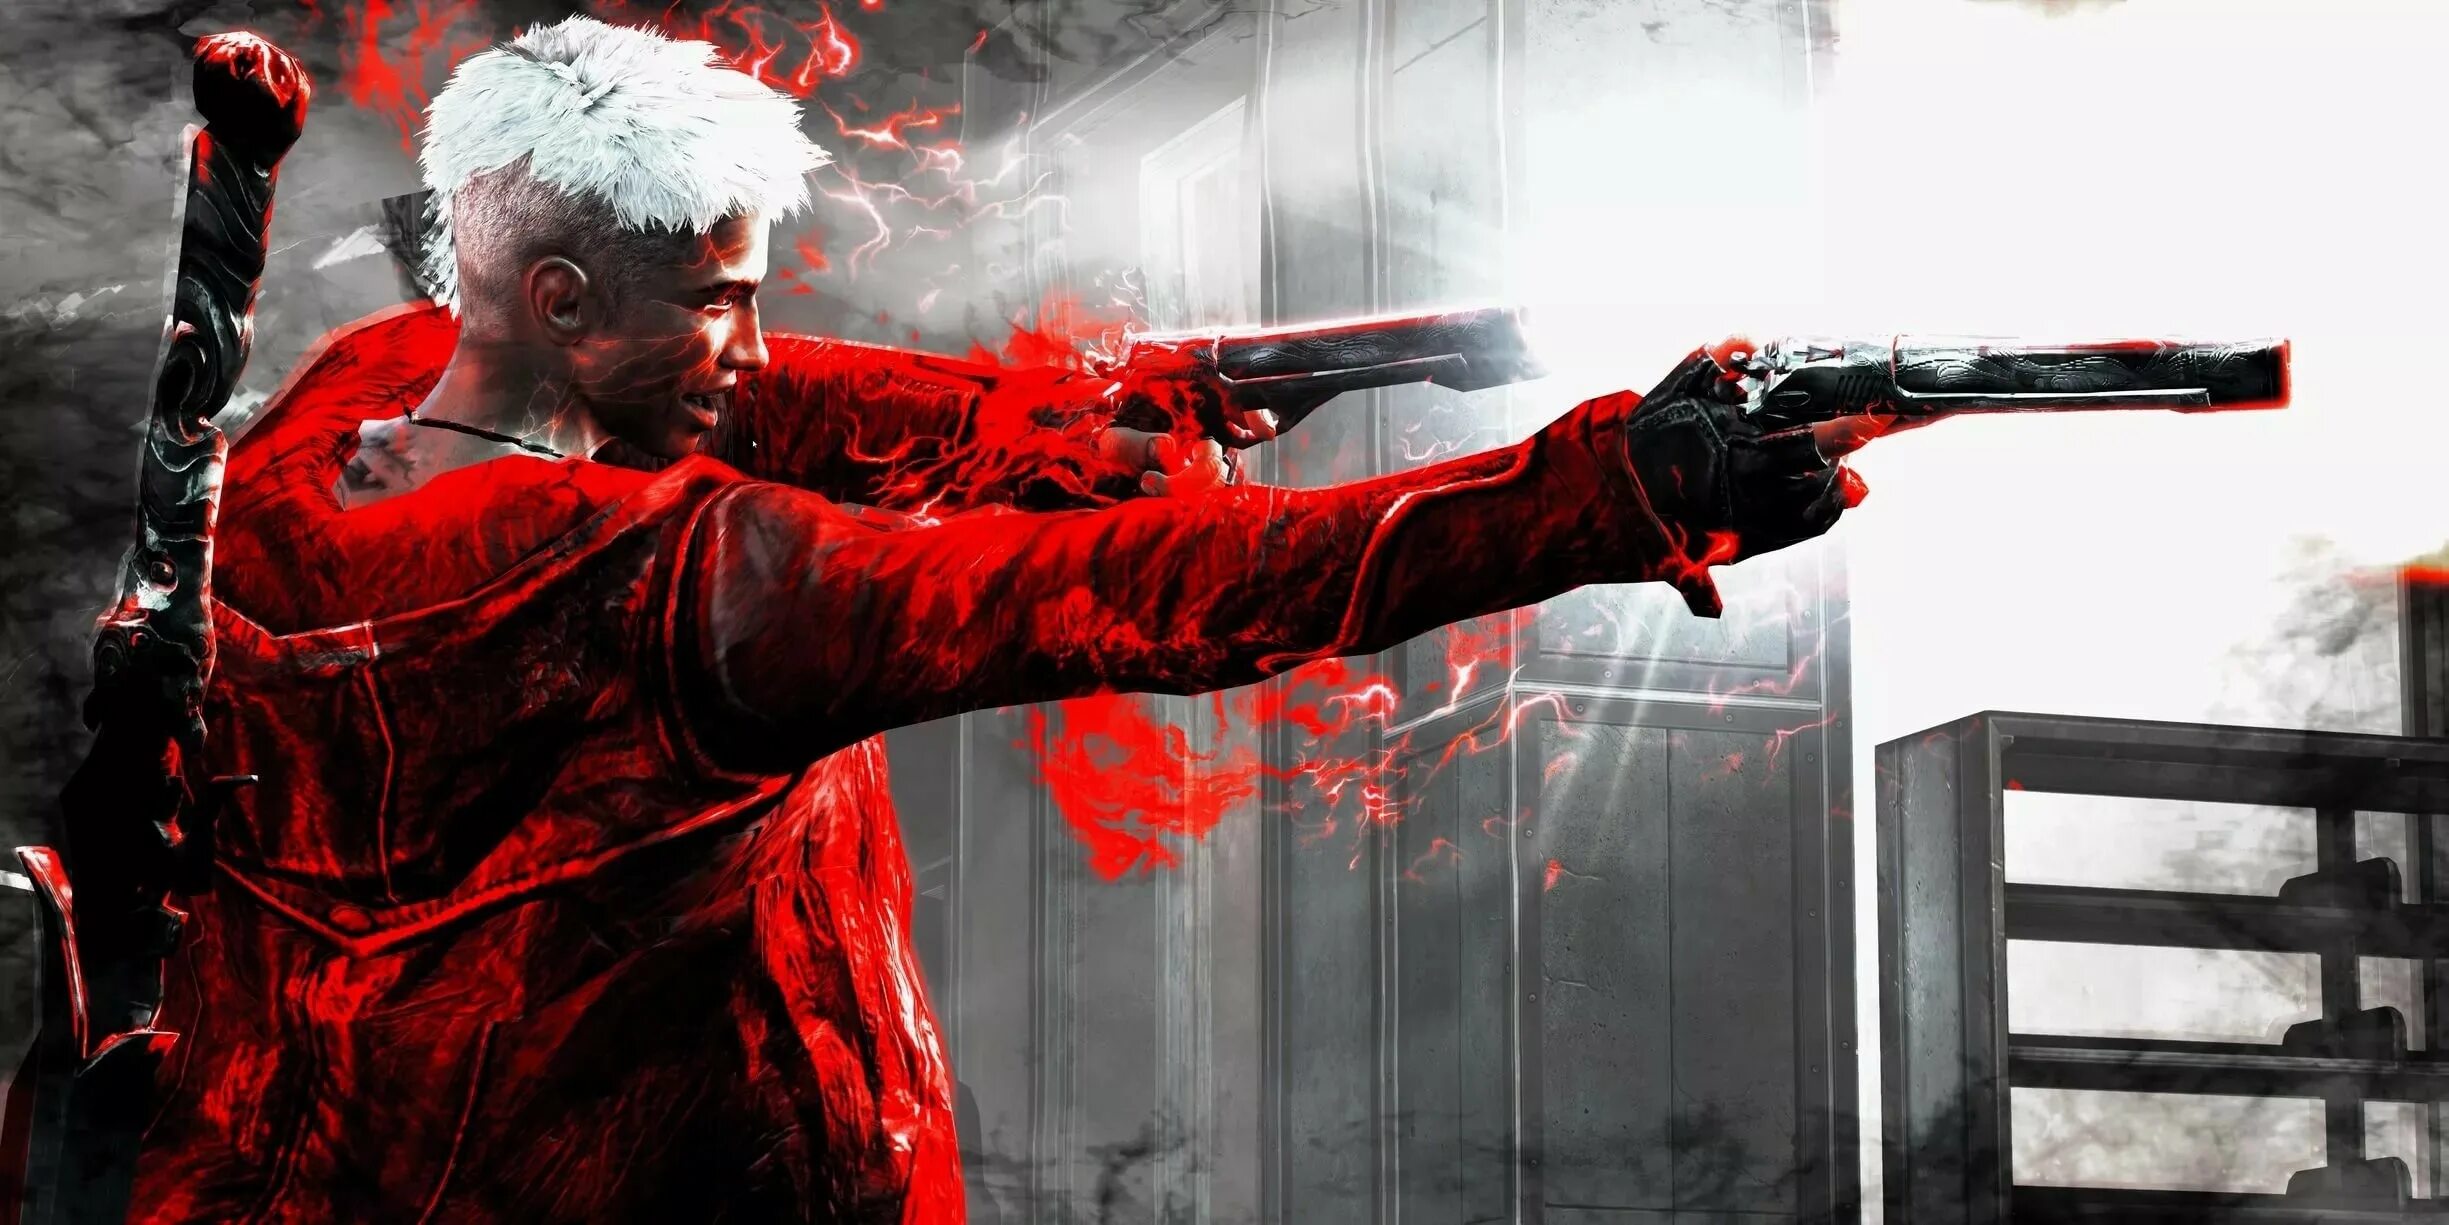 DMC Devil May Cry. Devil May Cry Definitive Edition. Devil May Cry 2013. DMC Devil May Cry 5.